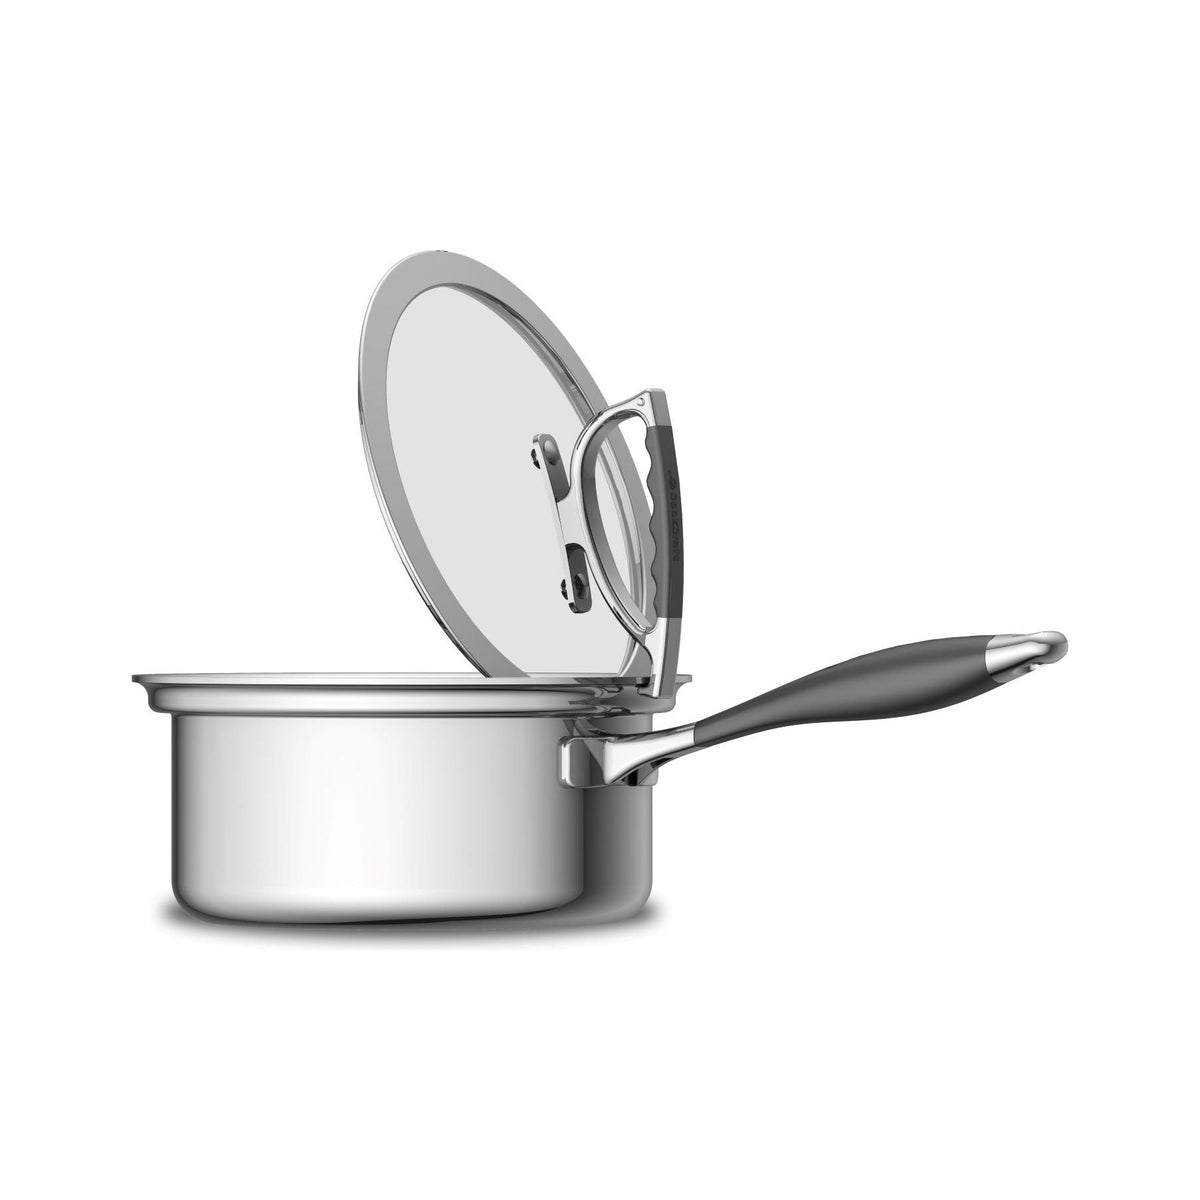  DELUXE Sauce Pan with Lid, 3 Quart 3-Ply Stainless